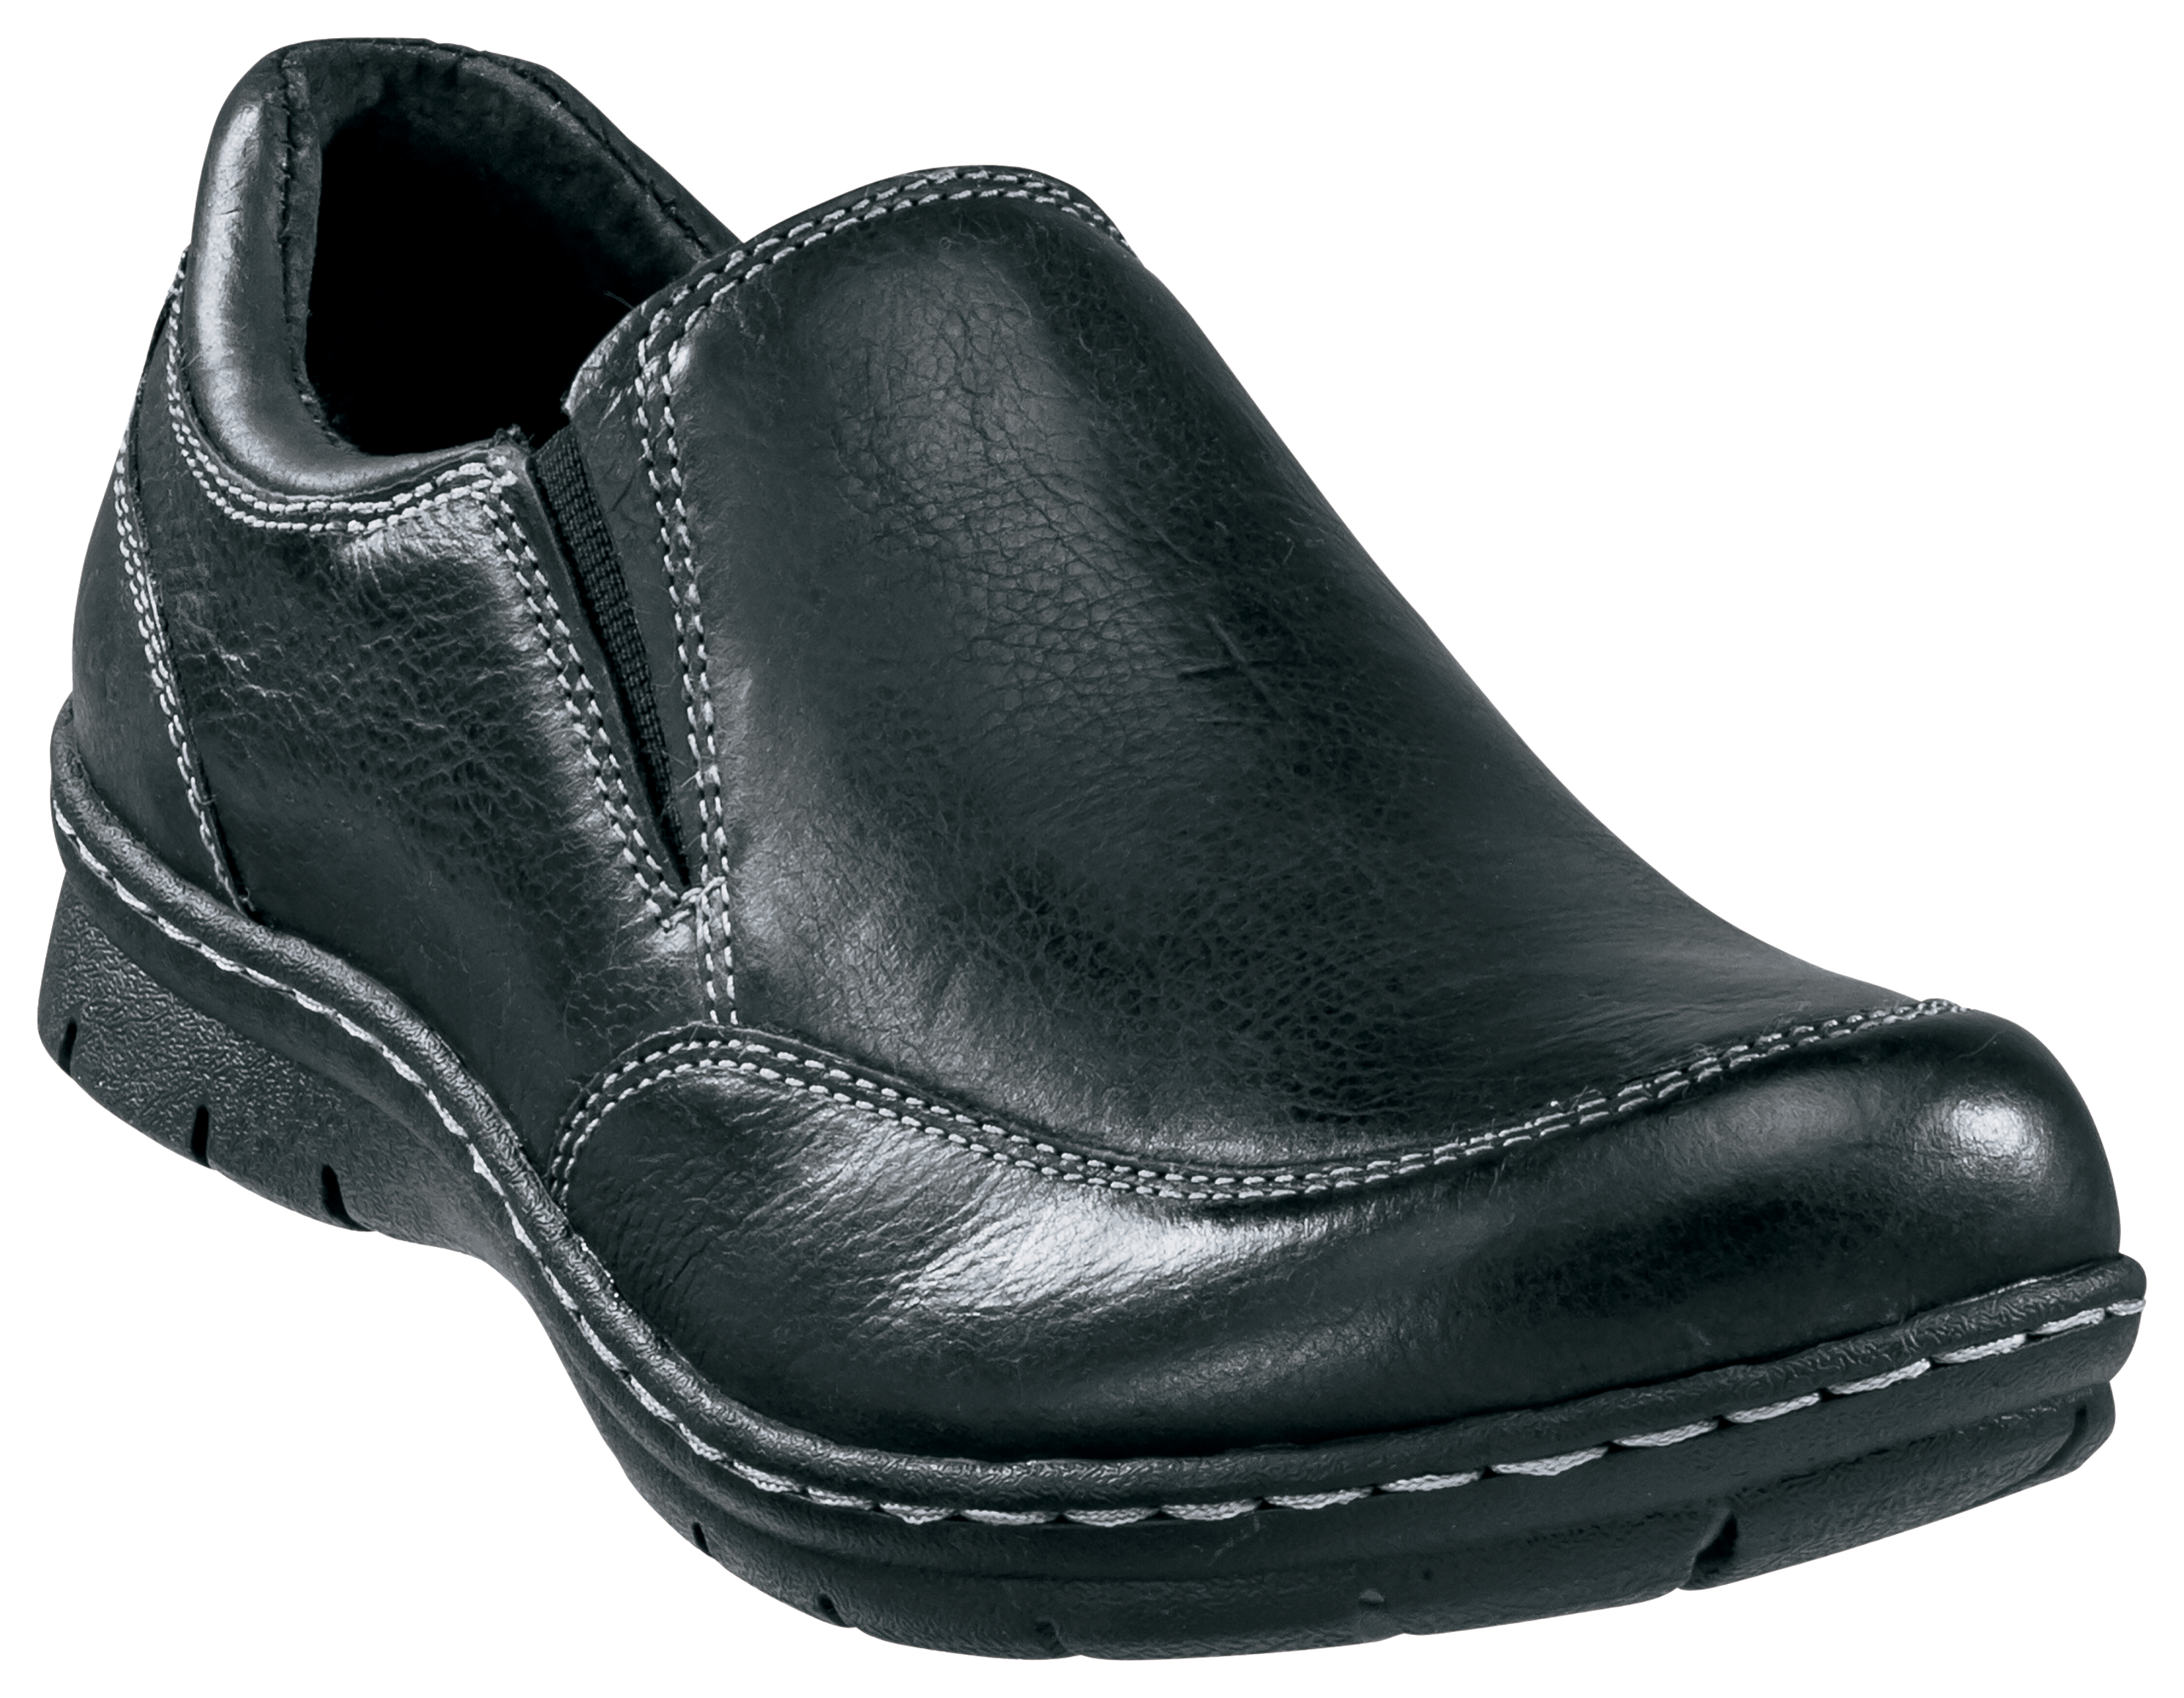 B.O.C. Truro Slip-On Shoes for Ladies | Bass Pro Shops